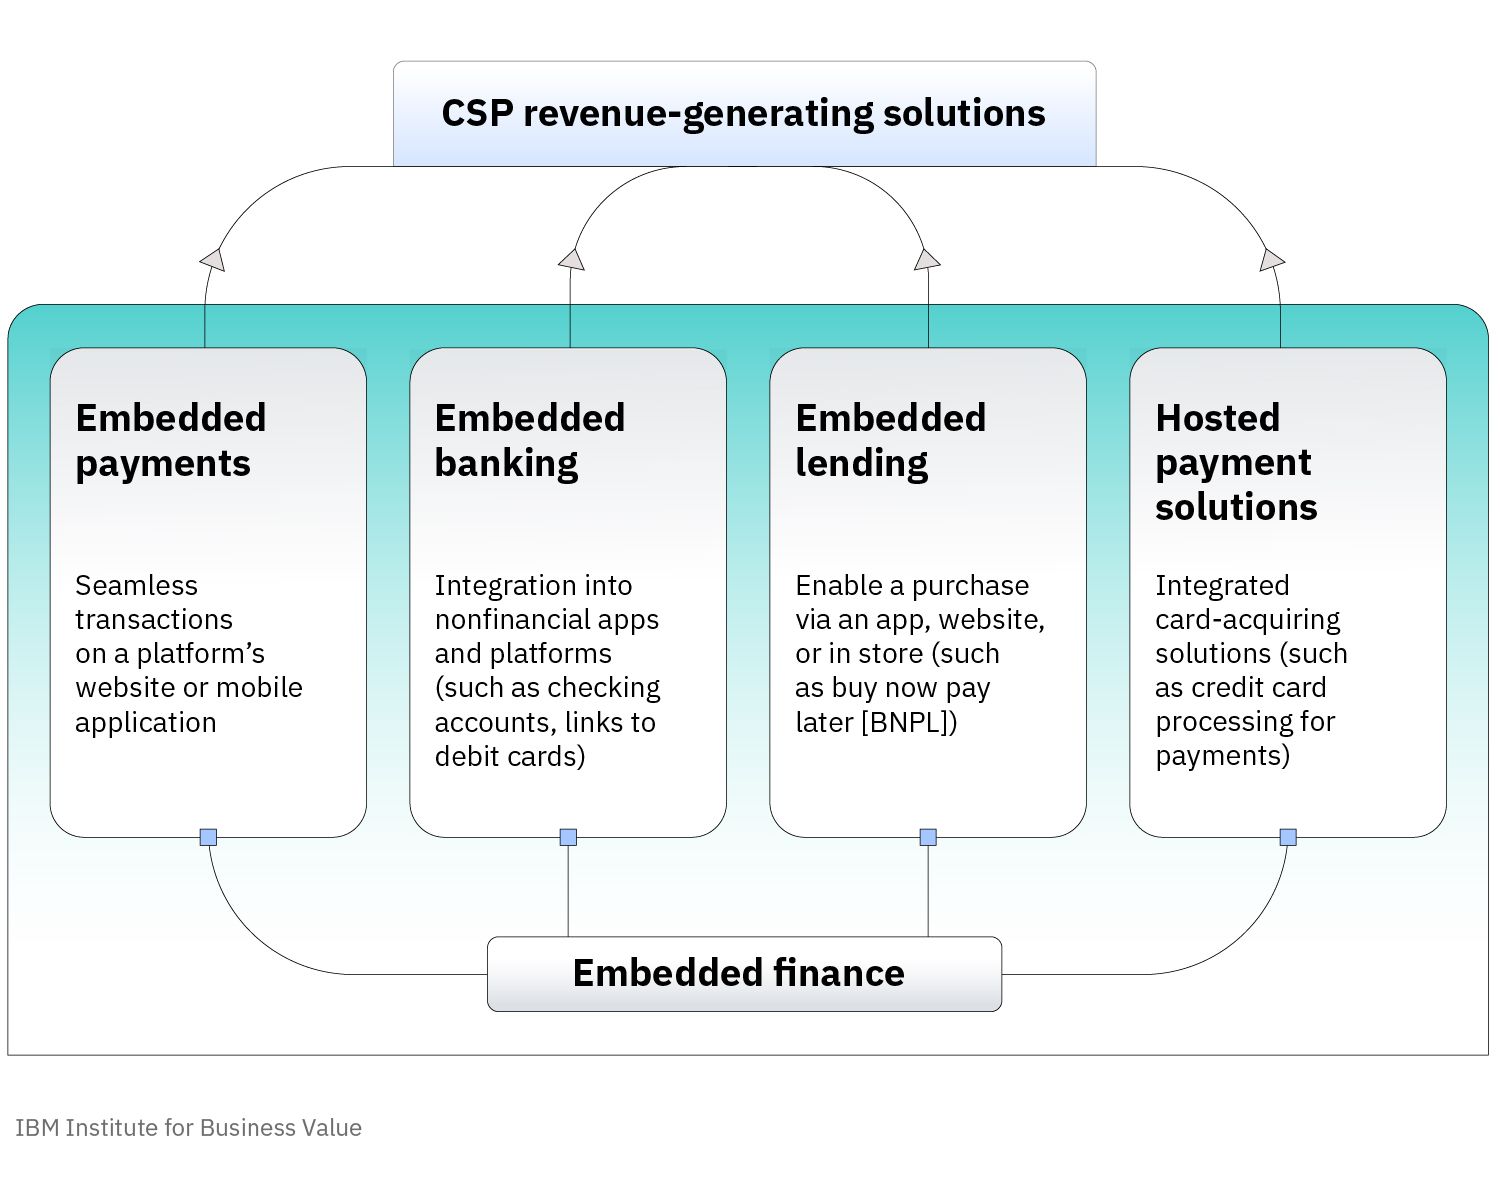 CSPs and banks can collaborate on embedded finance services focused on four primary areas.